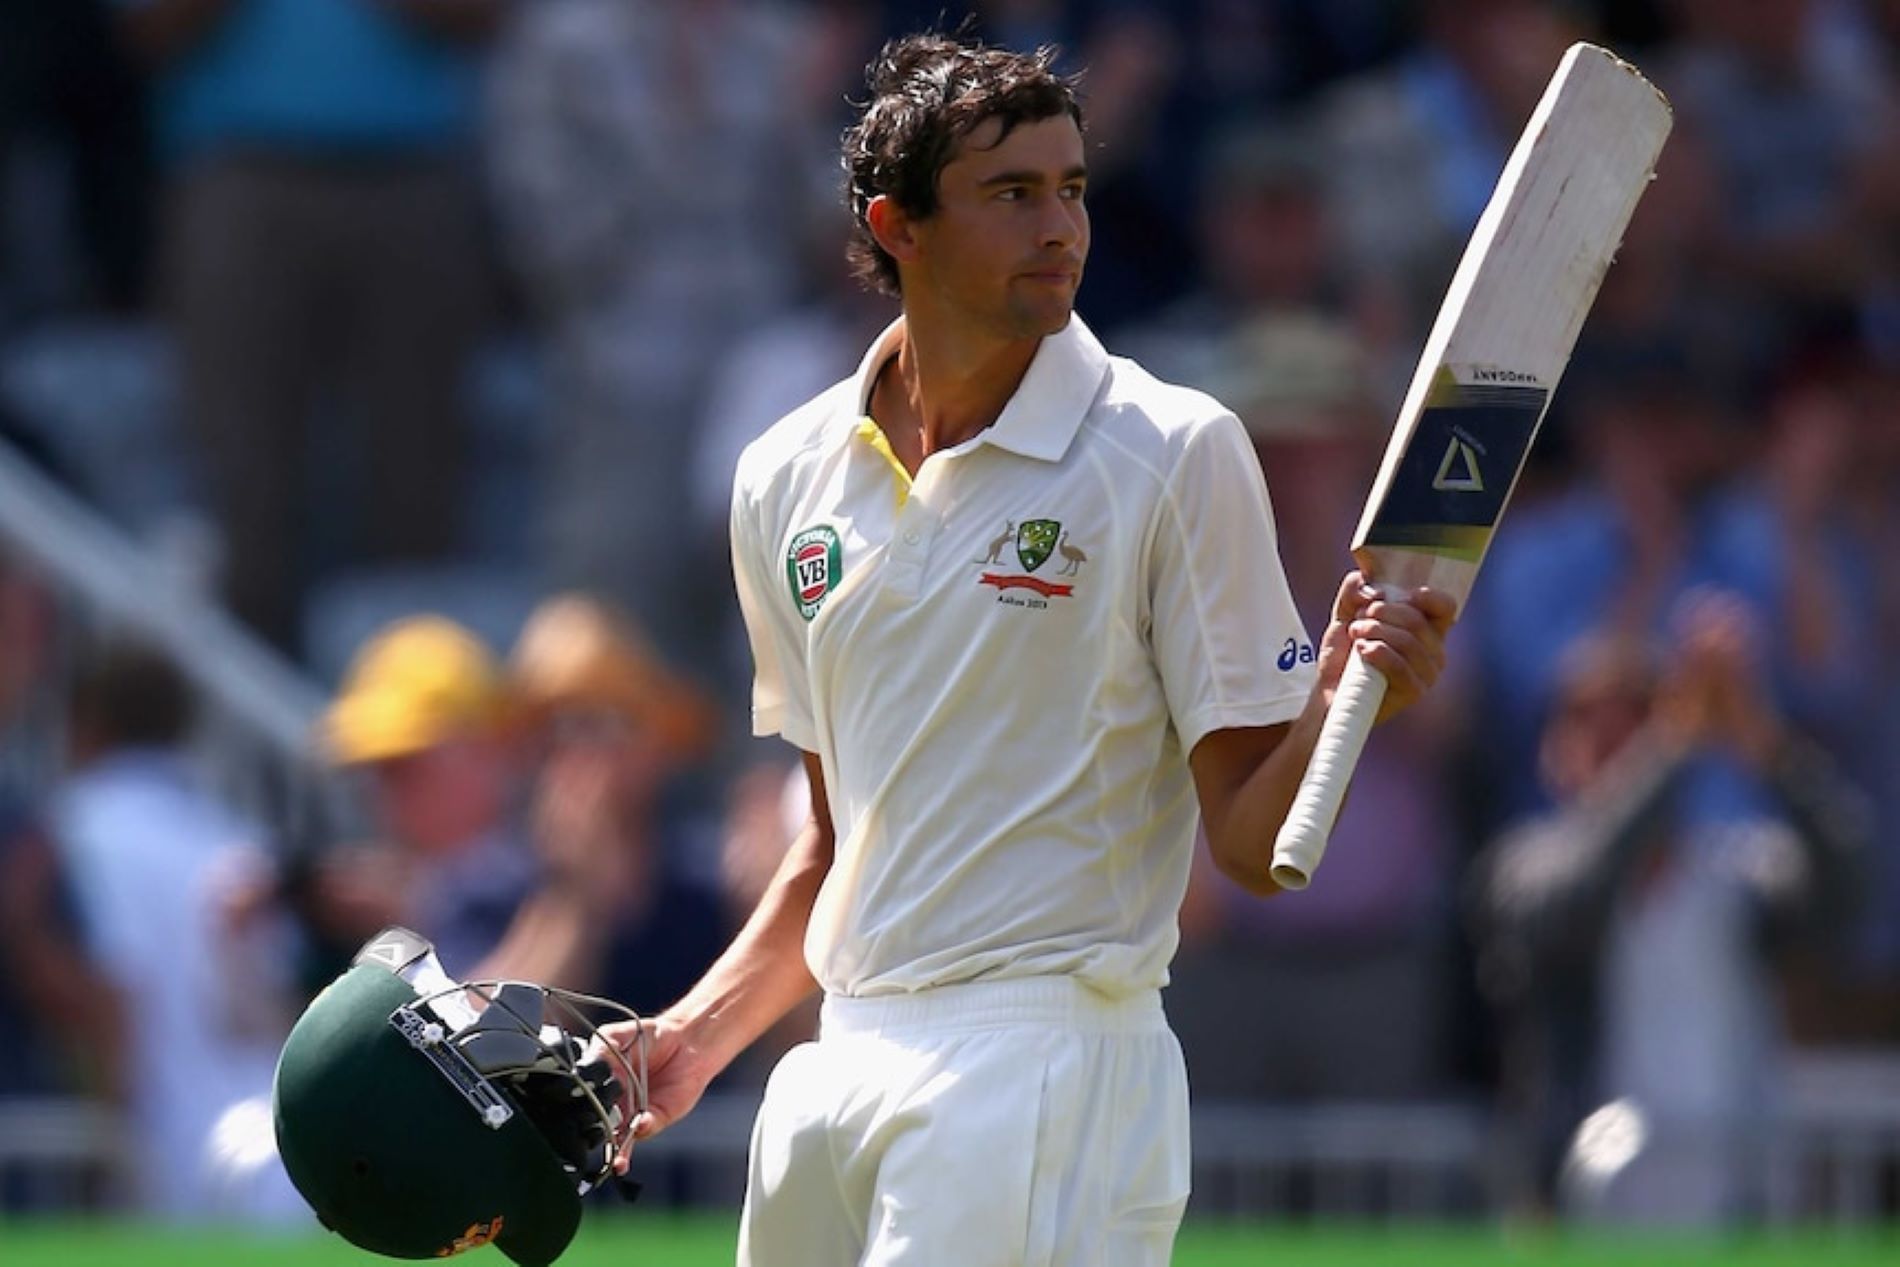 Agar produced one of the finest rearguard innings in Ashes history.